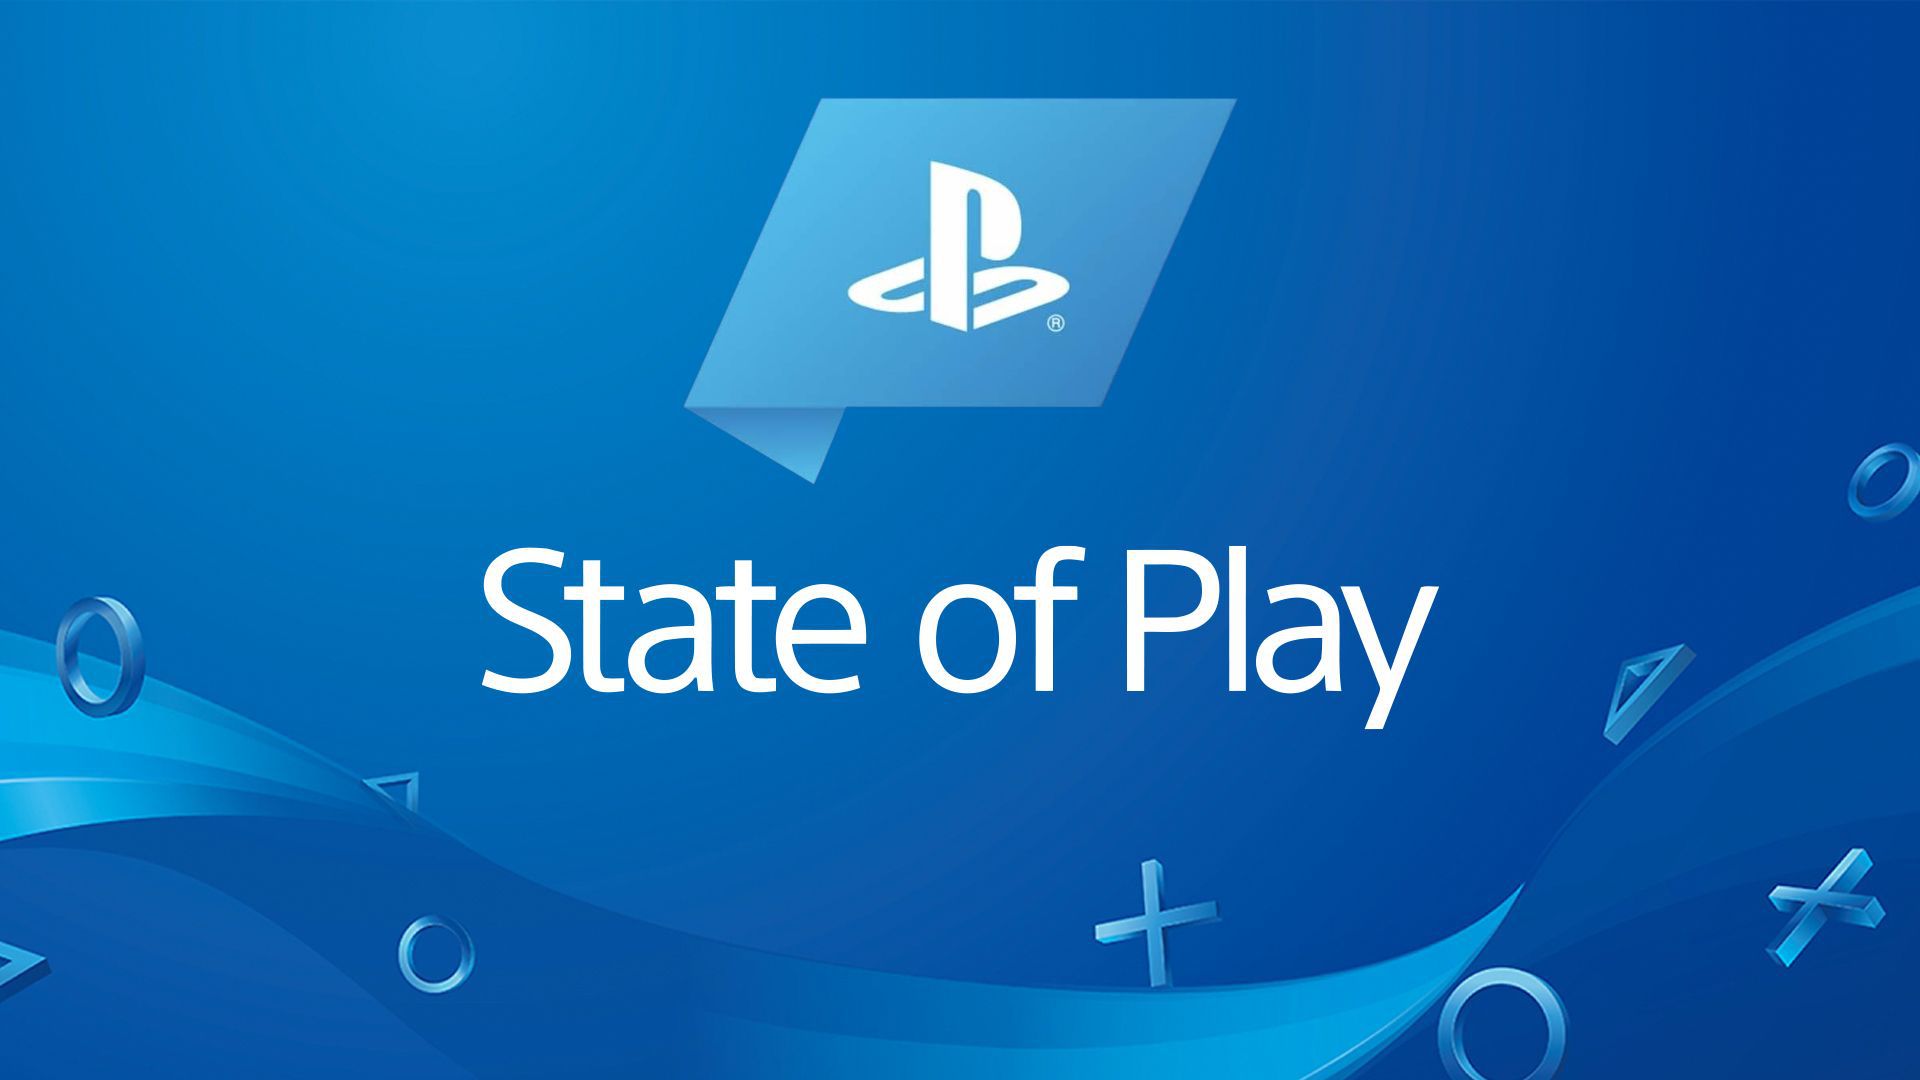 PlayStation State Of Play Event Set For February 23